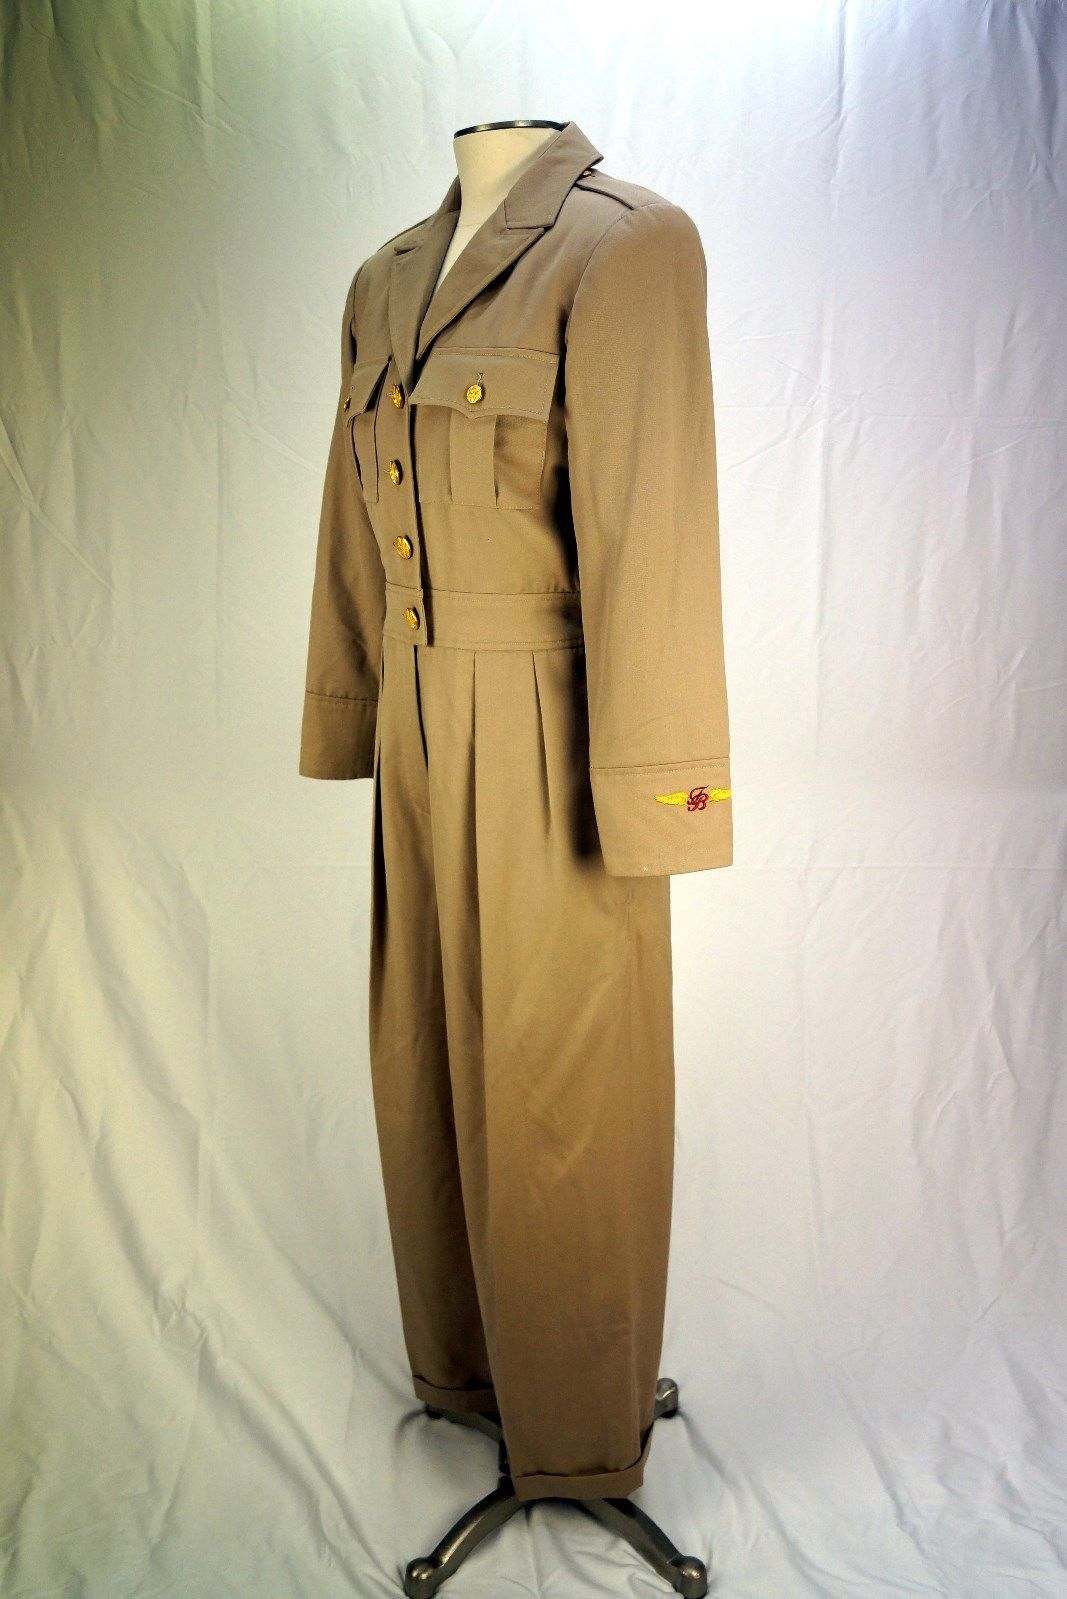 Need help on these uniforms (?) - WOMEN'S SERVICES - U.S. Militaria Forum